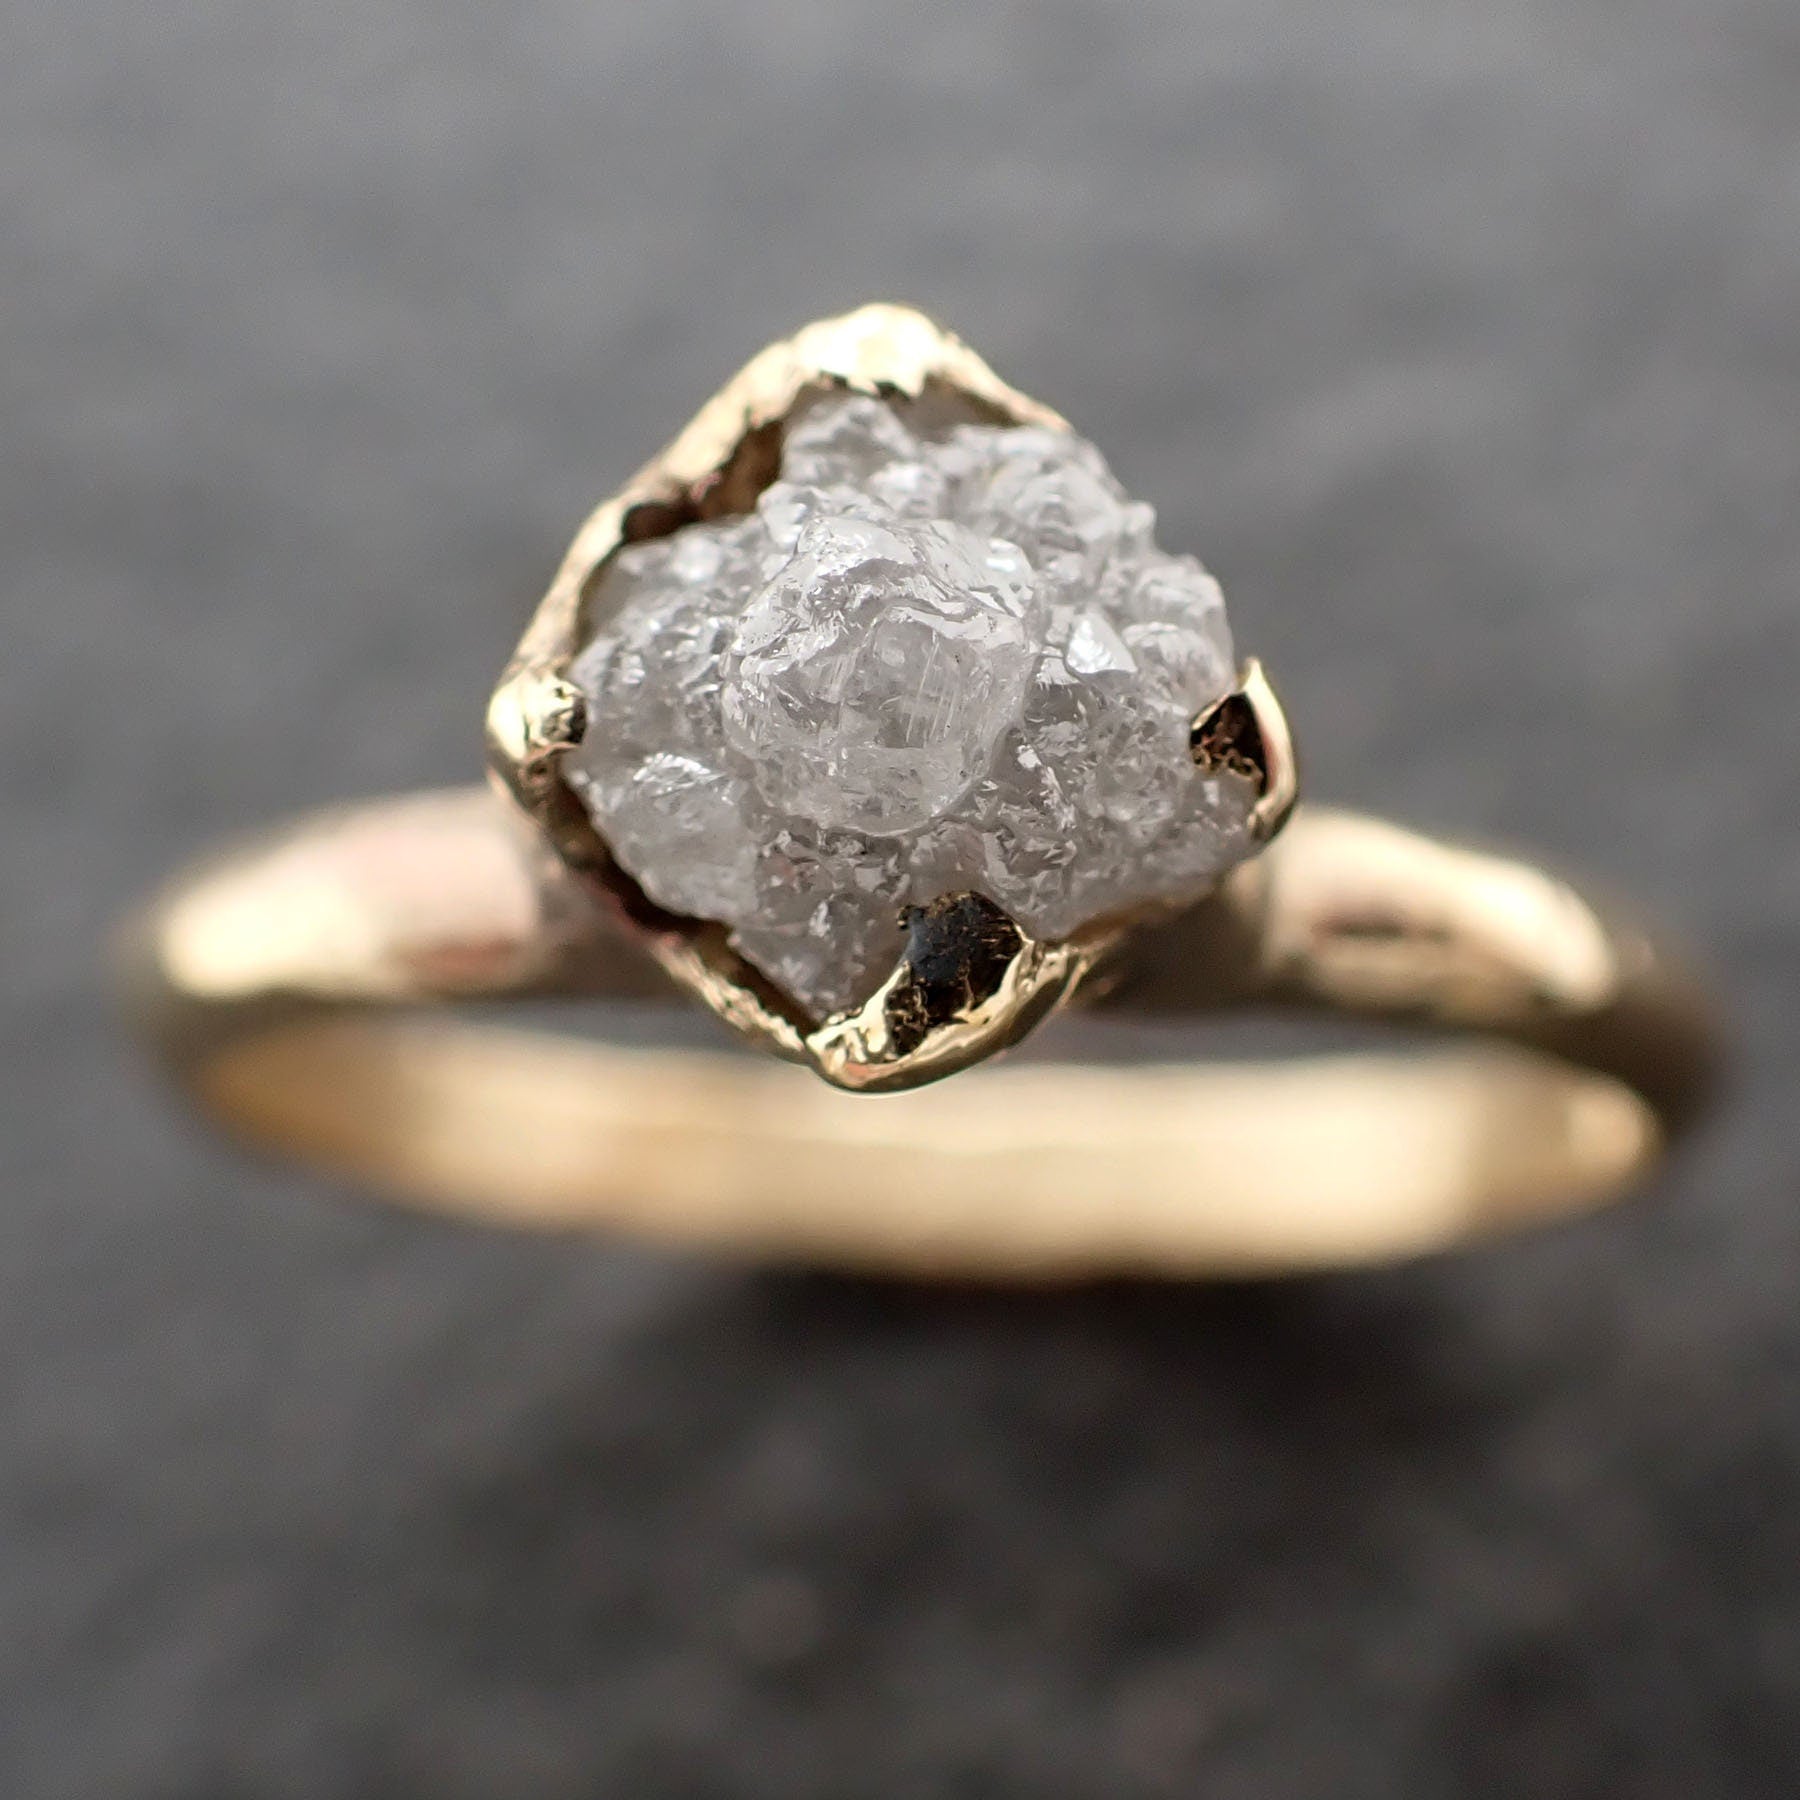 Raw Diamond Engagement Ring Rough Uncut Diamond Solitaire Recycled 14k yellow gold Conflict Free Diamond Wedding Promise 3121